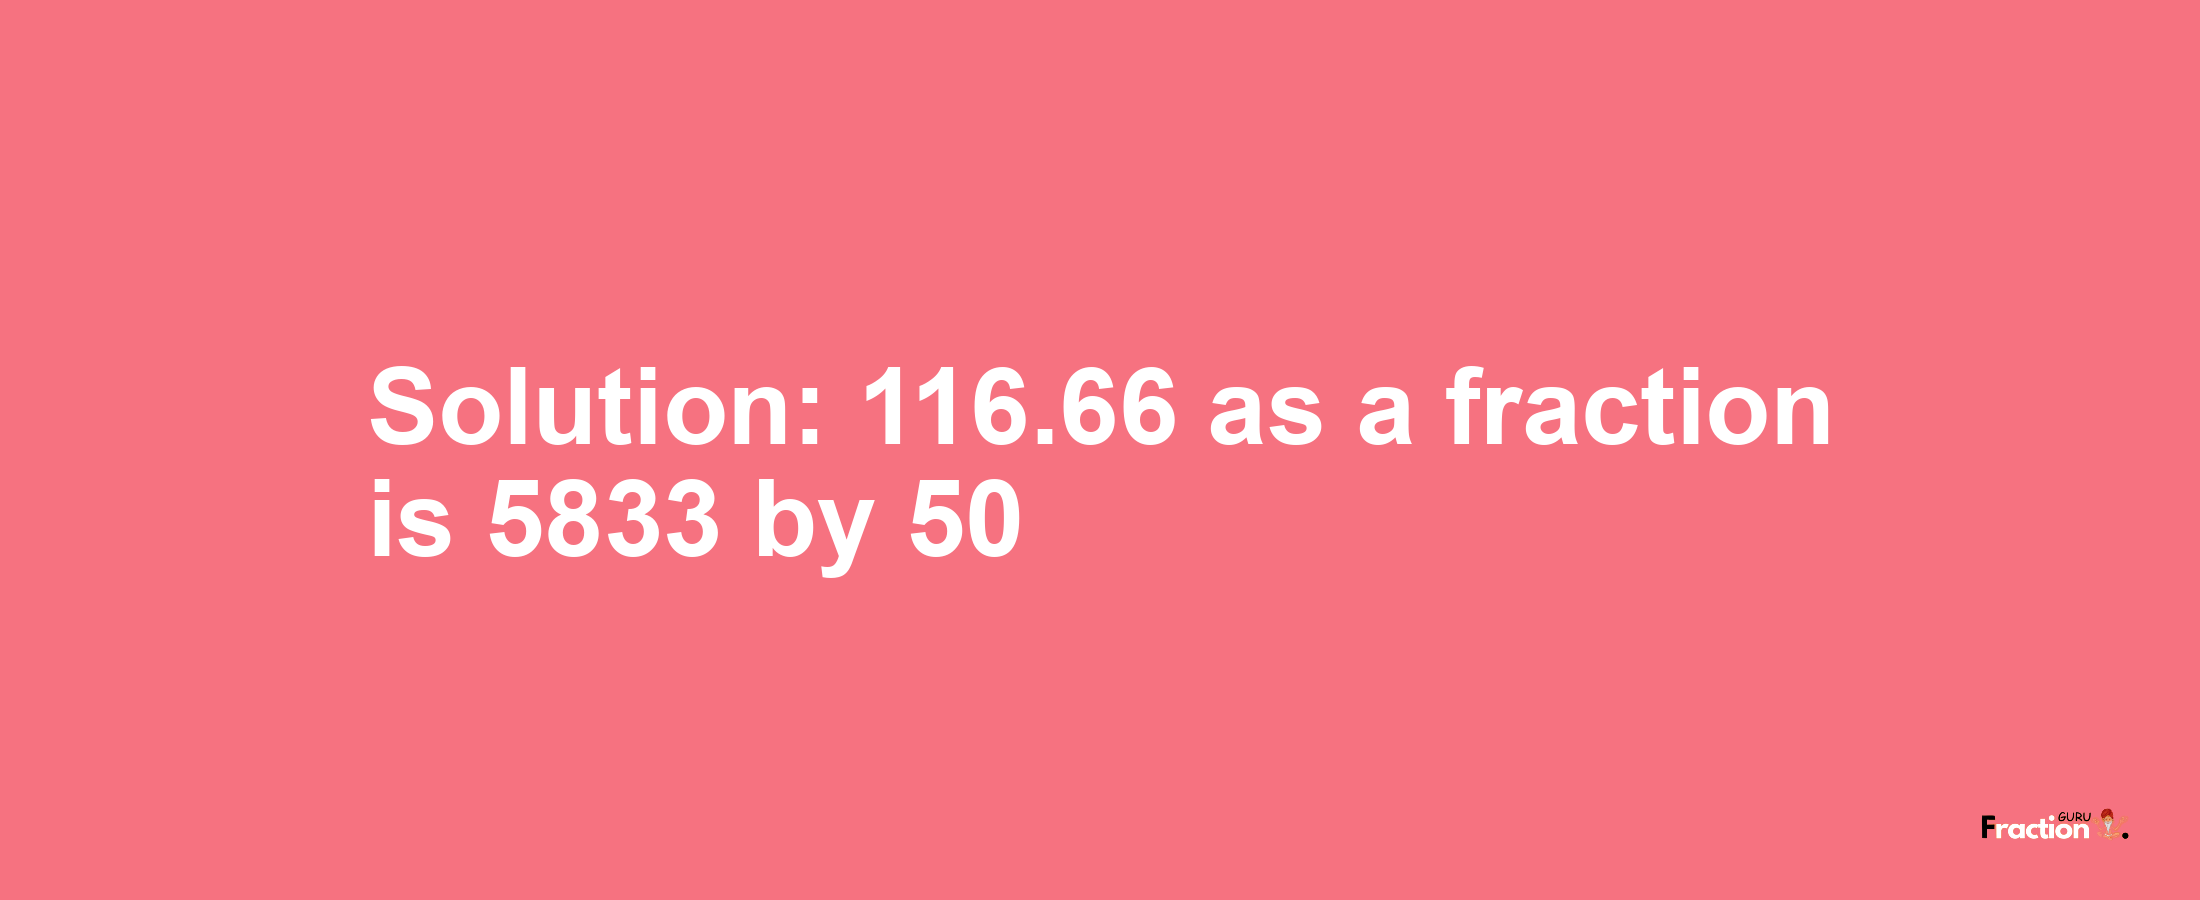 Solution:116.66 as a fraction is 5833/50